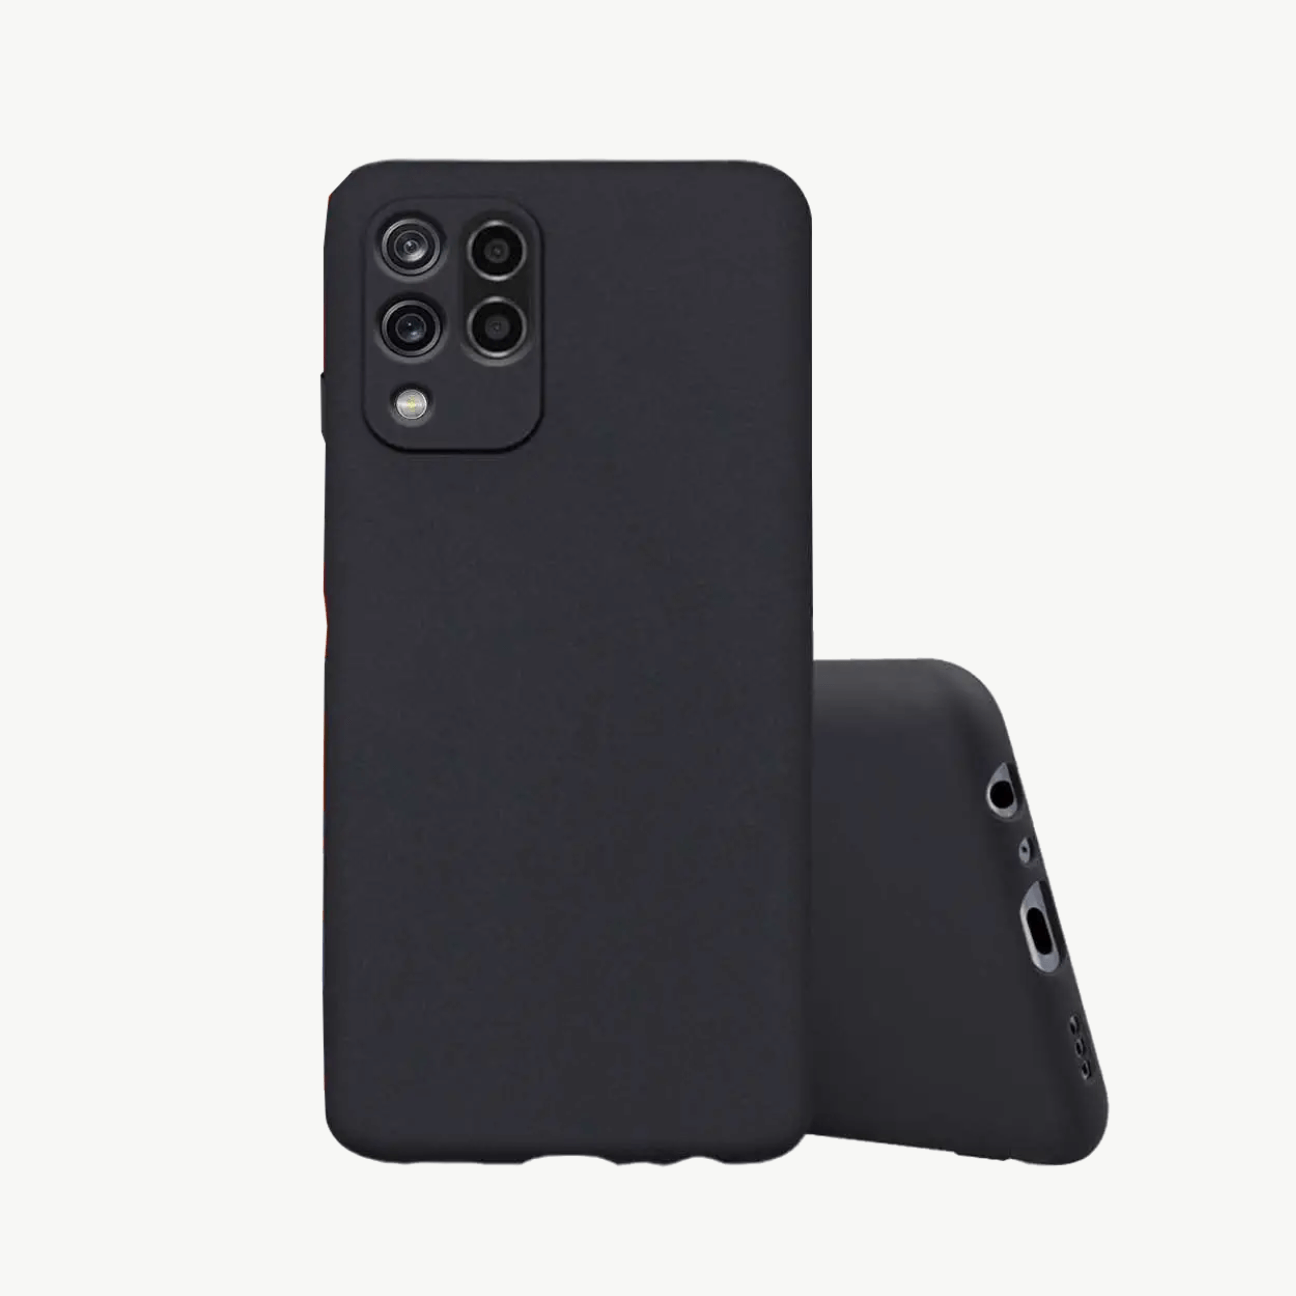 iPhone 6,6s Black Soft Silicone Phone Case